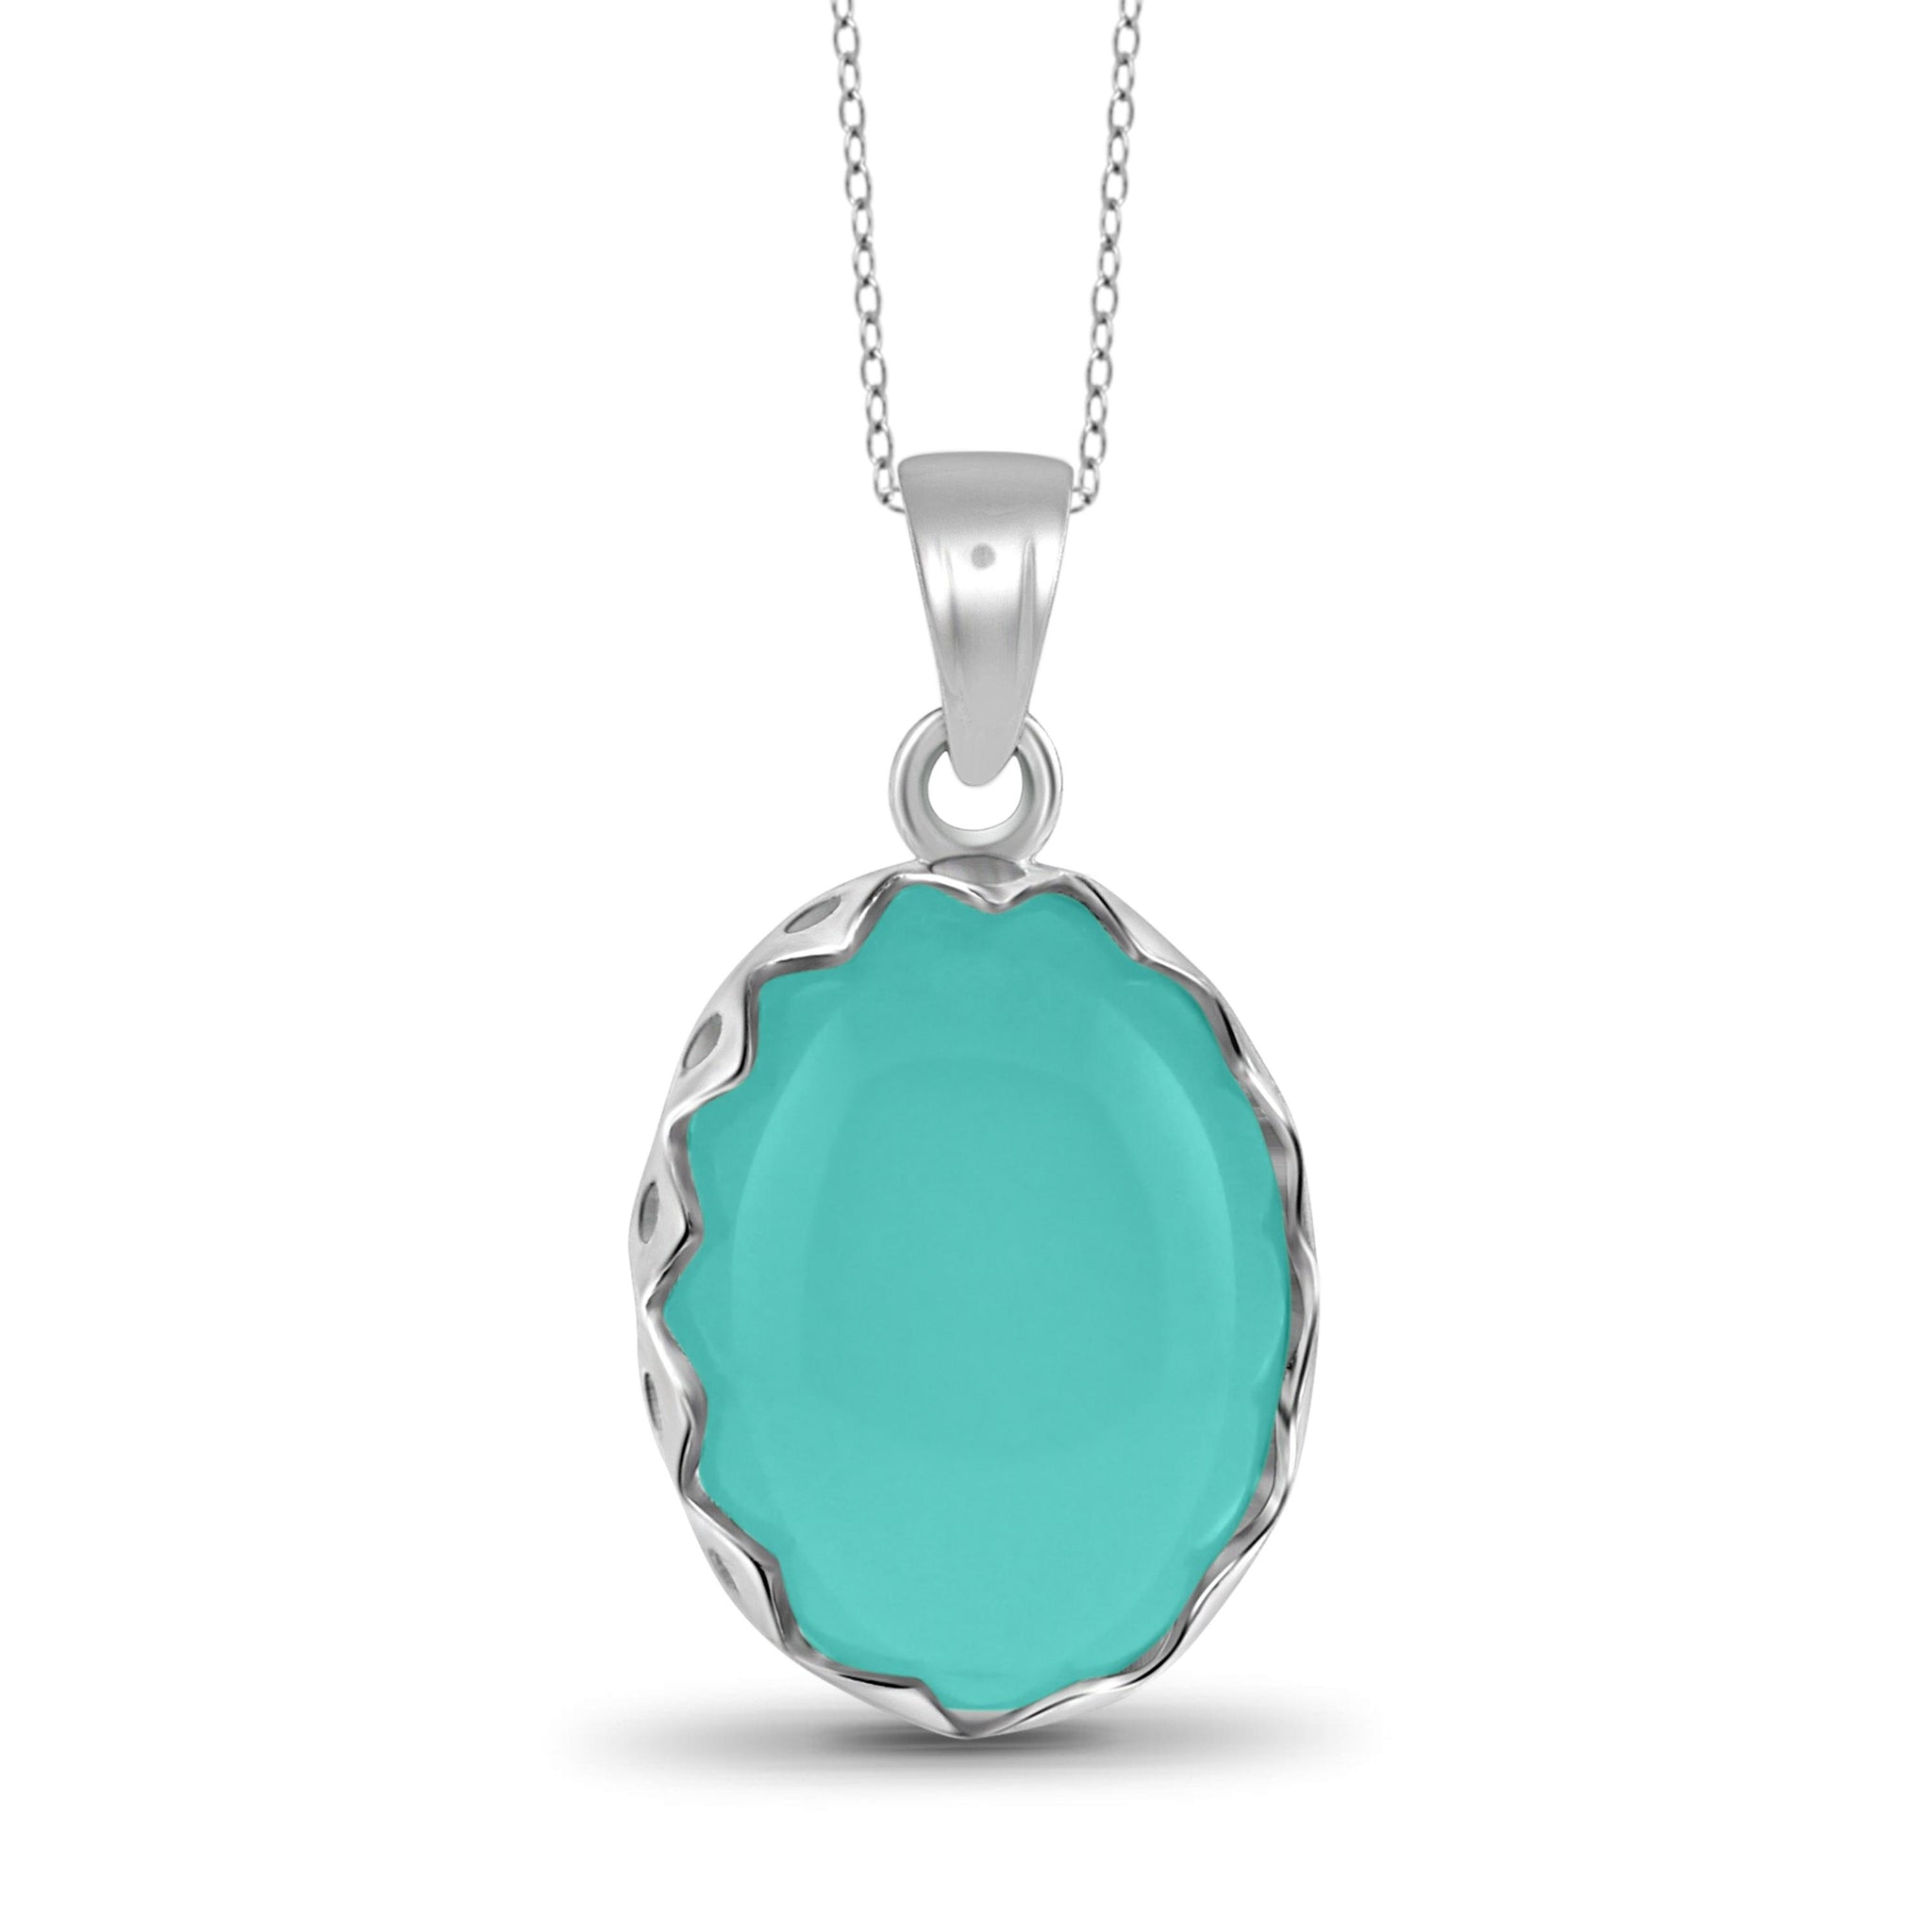 JewelonFire 9 3/4 Carat T.G.W. Chalcedony Sterling Silver Fashion Pendant - Assorted Colors